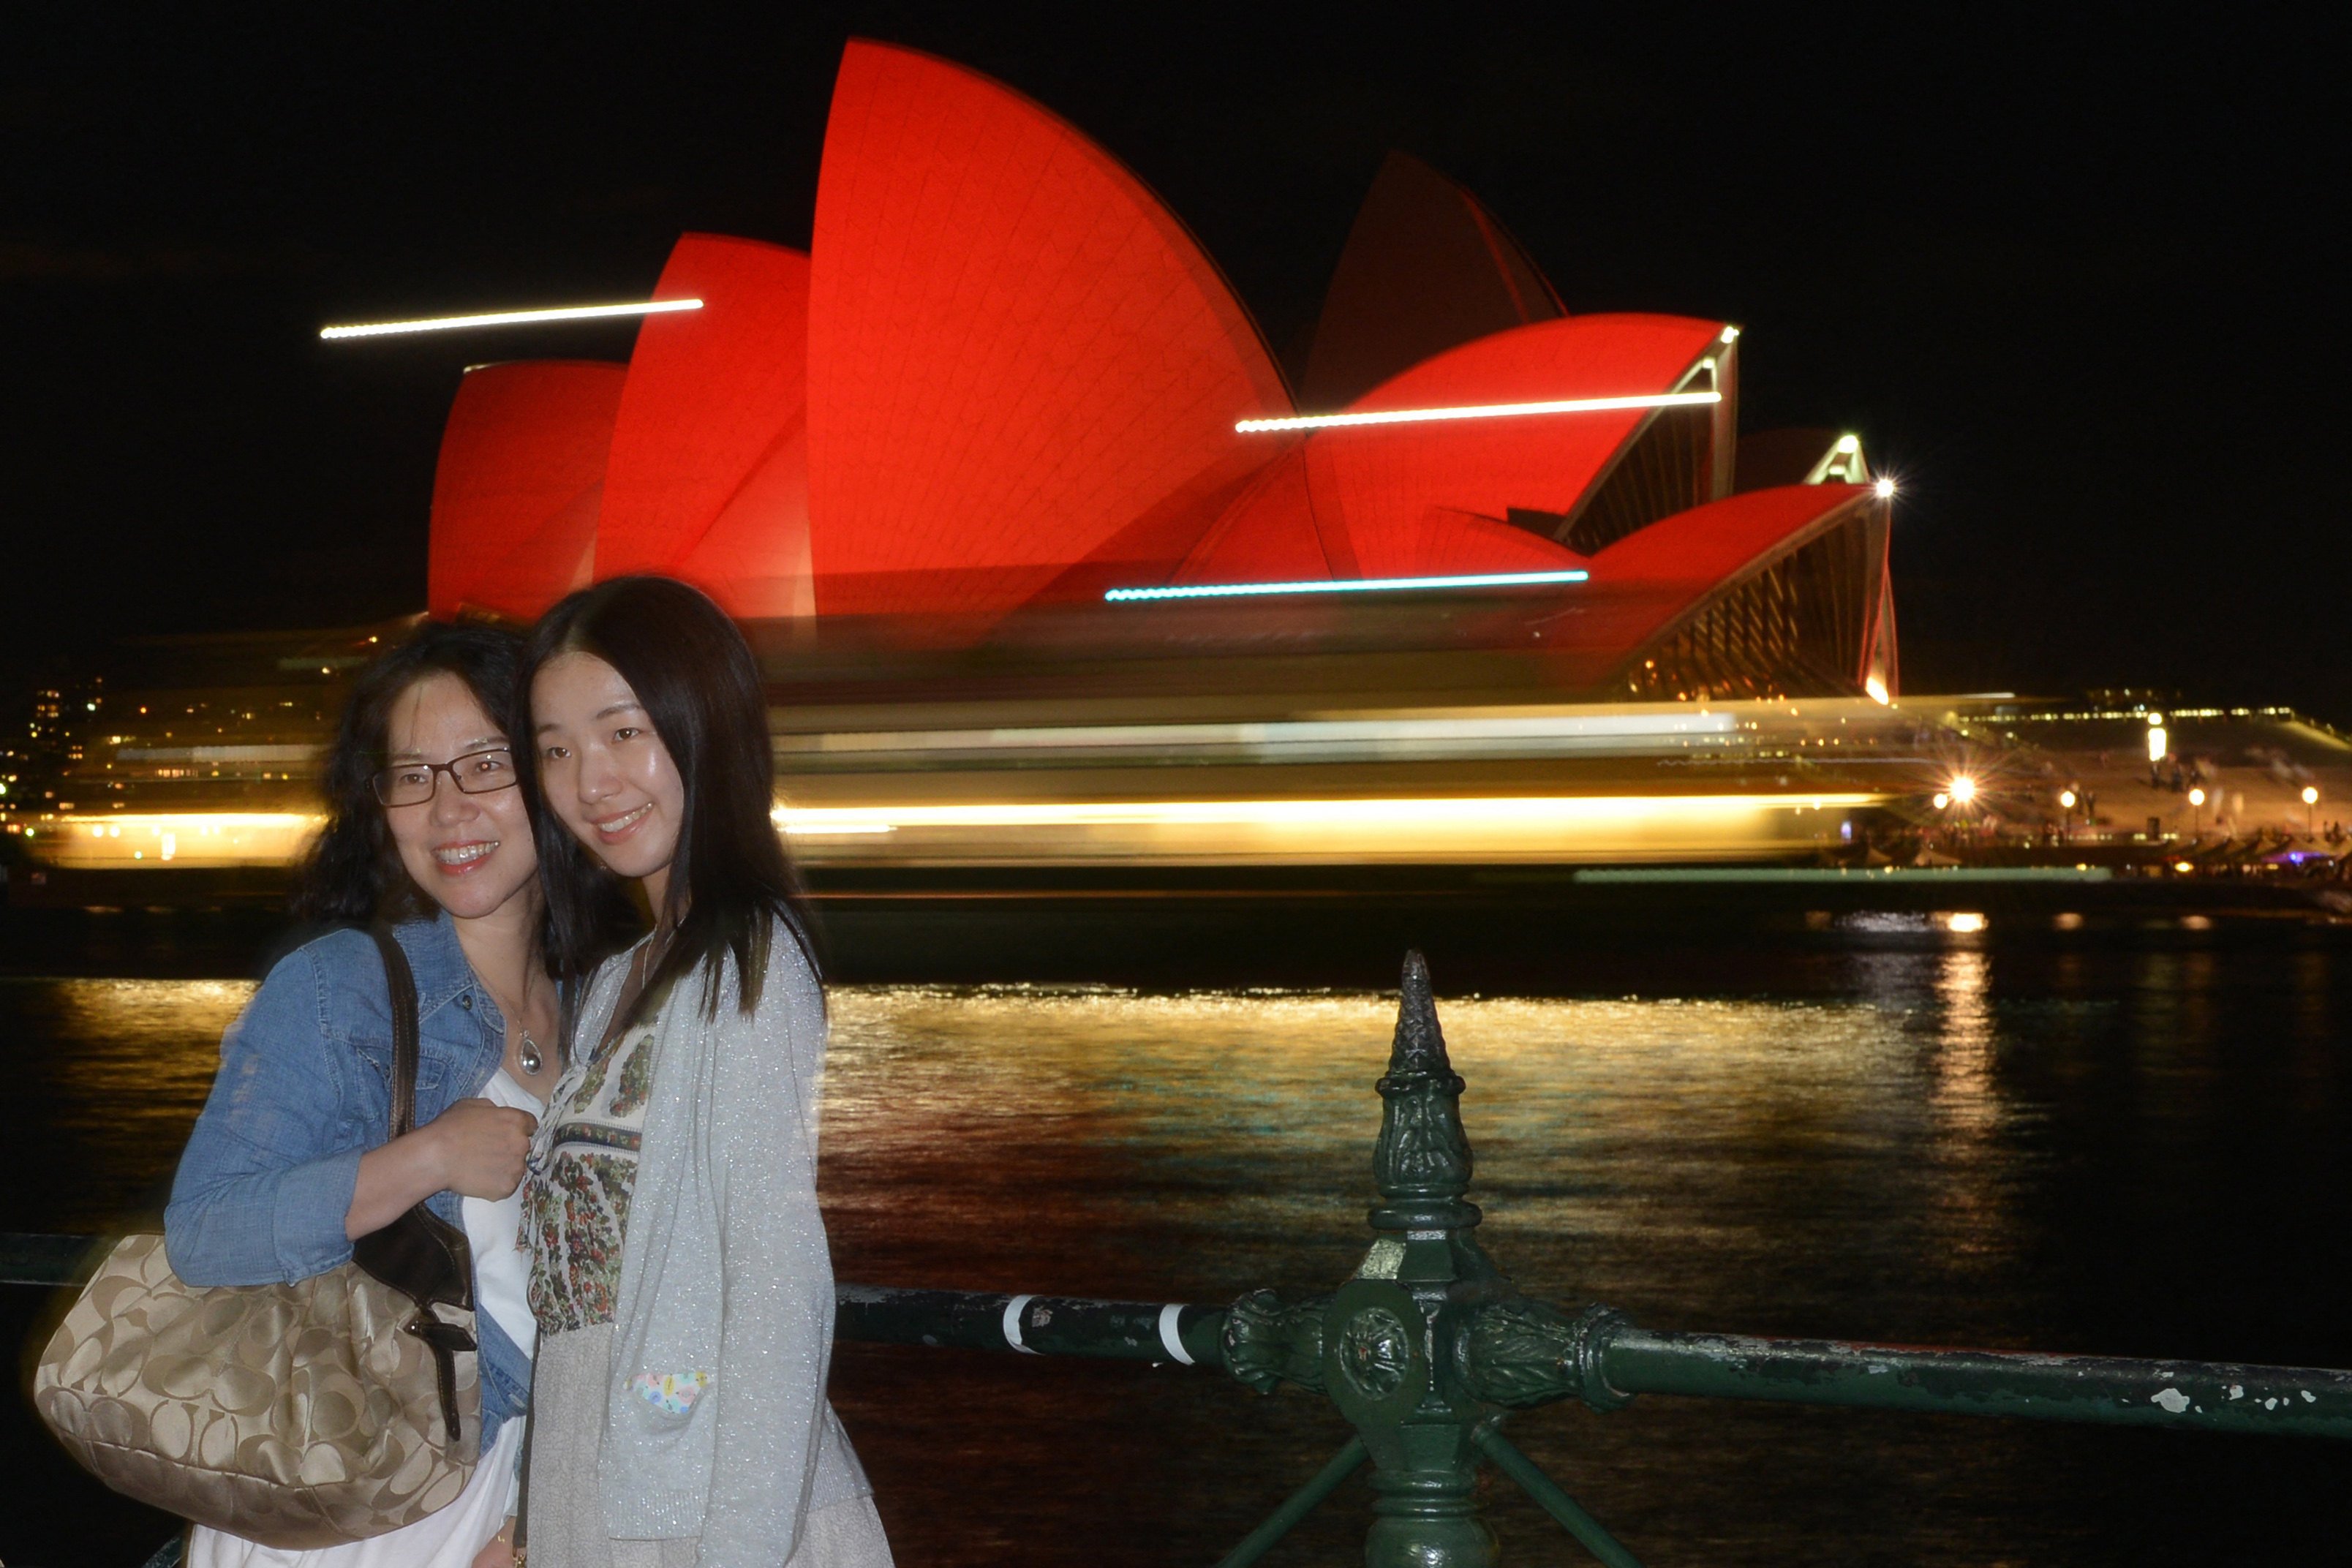 Chinese tourists take photos in front of the Sydney Opera House which is lit up red to welcome in the Lunar New Year in Sydney on February 8, 2016. Photo: AFP